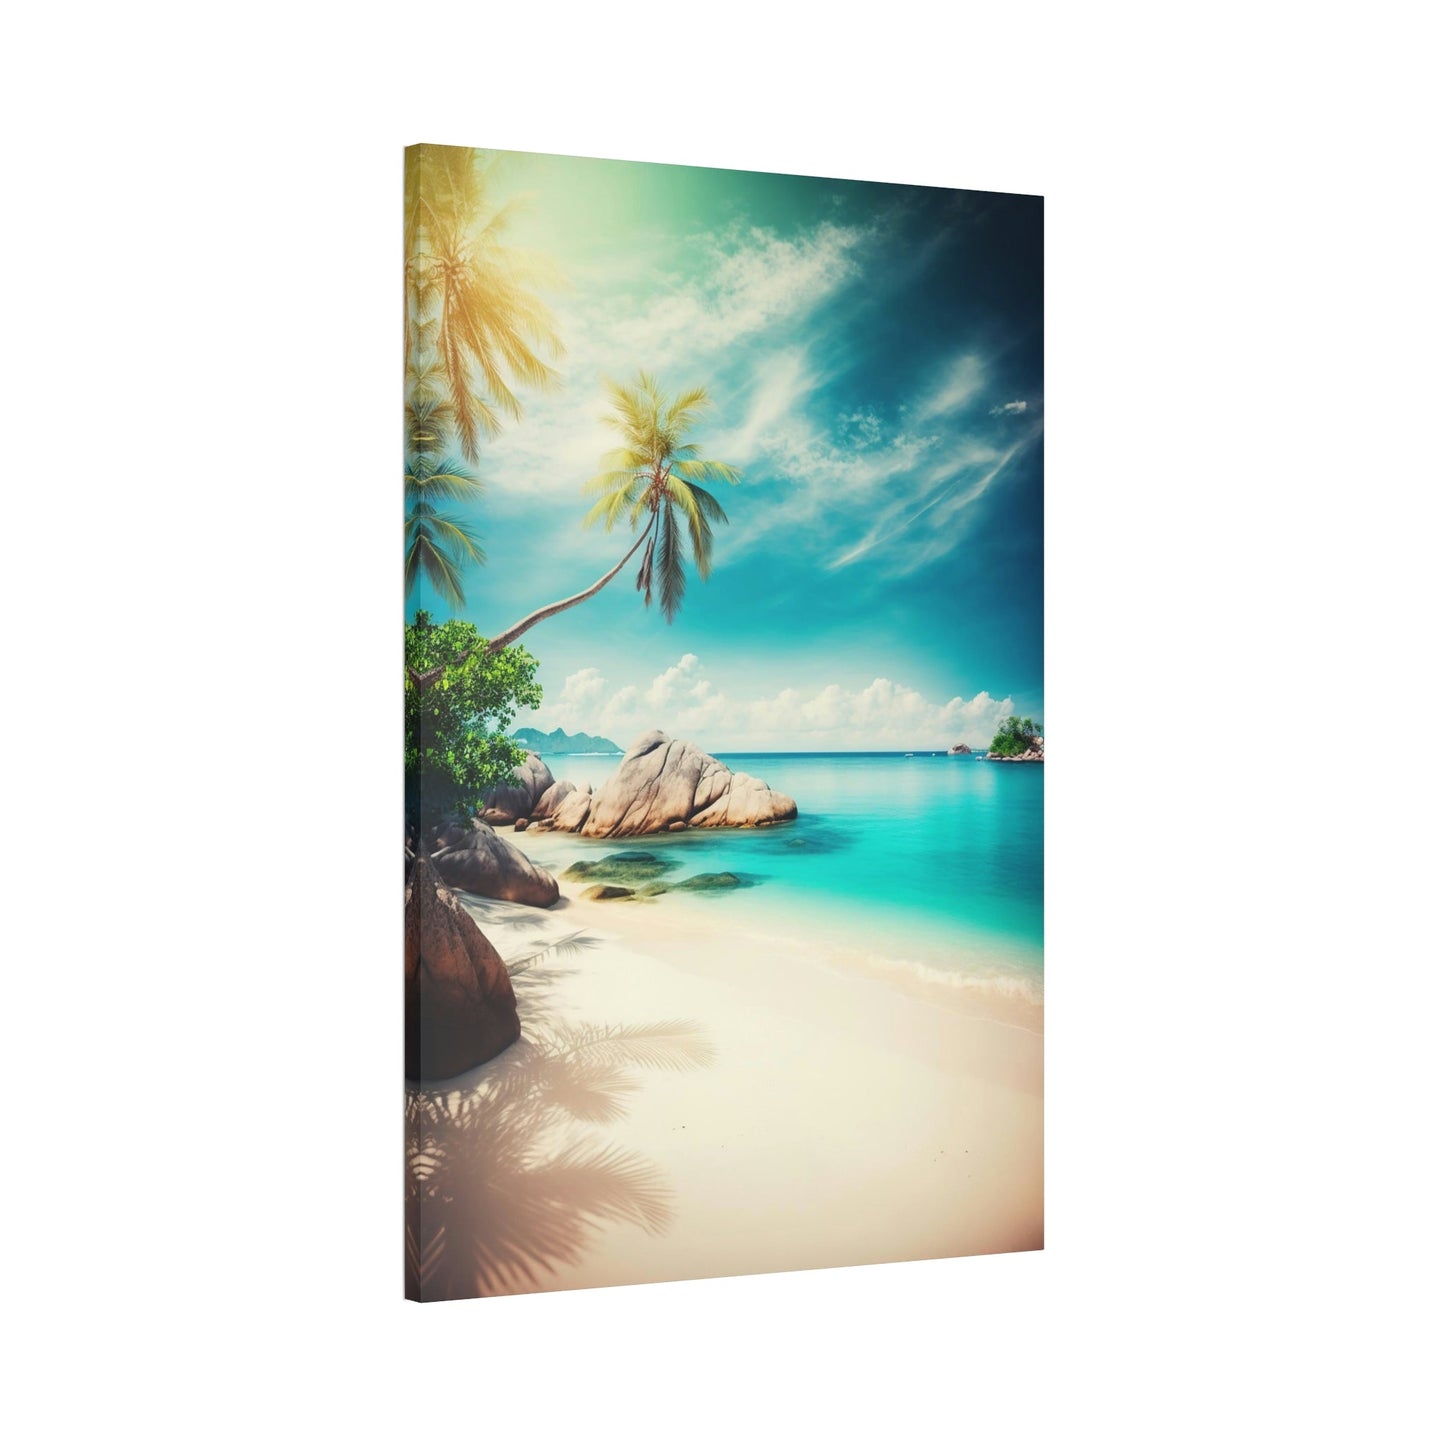 Beachfront Beauty: Poster of a Scenic Island Beach Scene on a Framed Poster